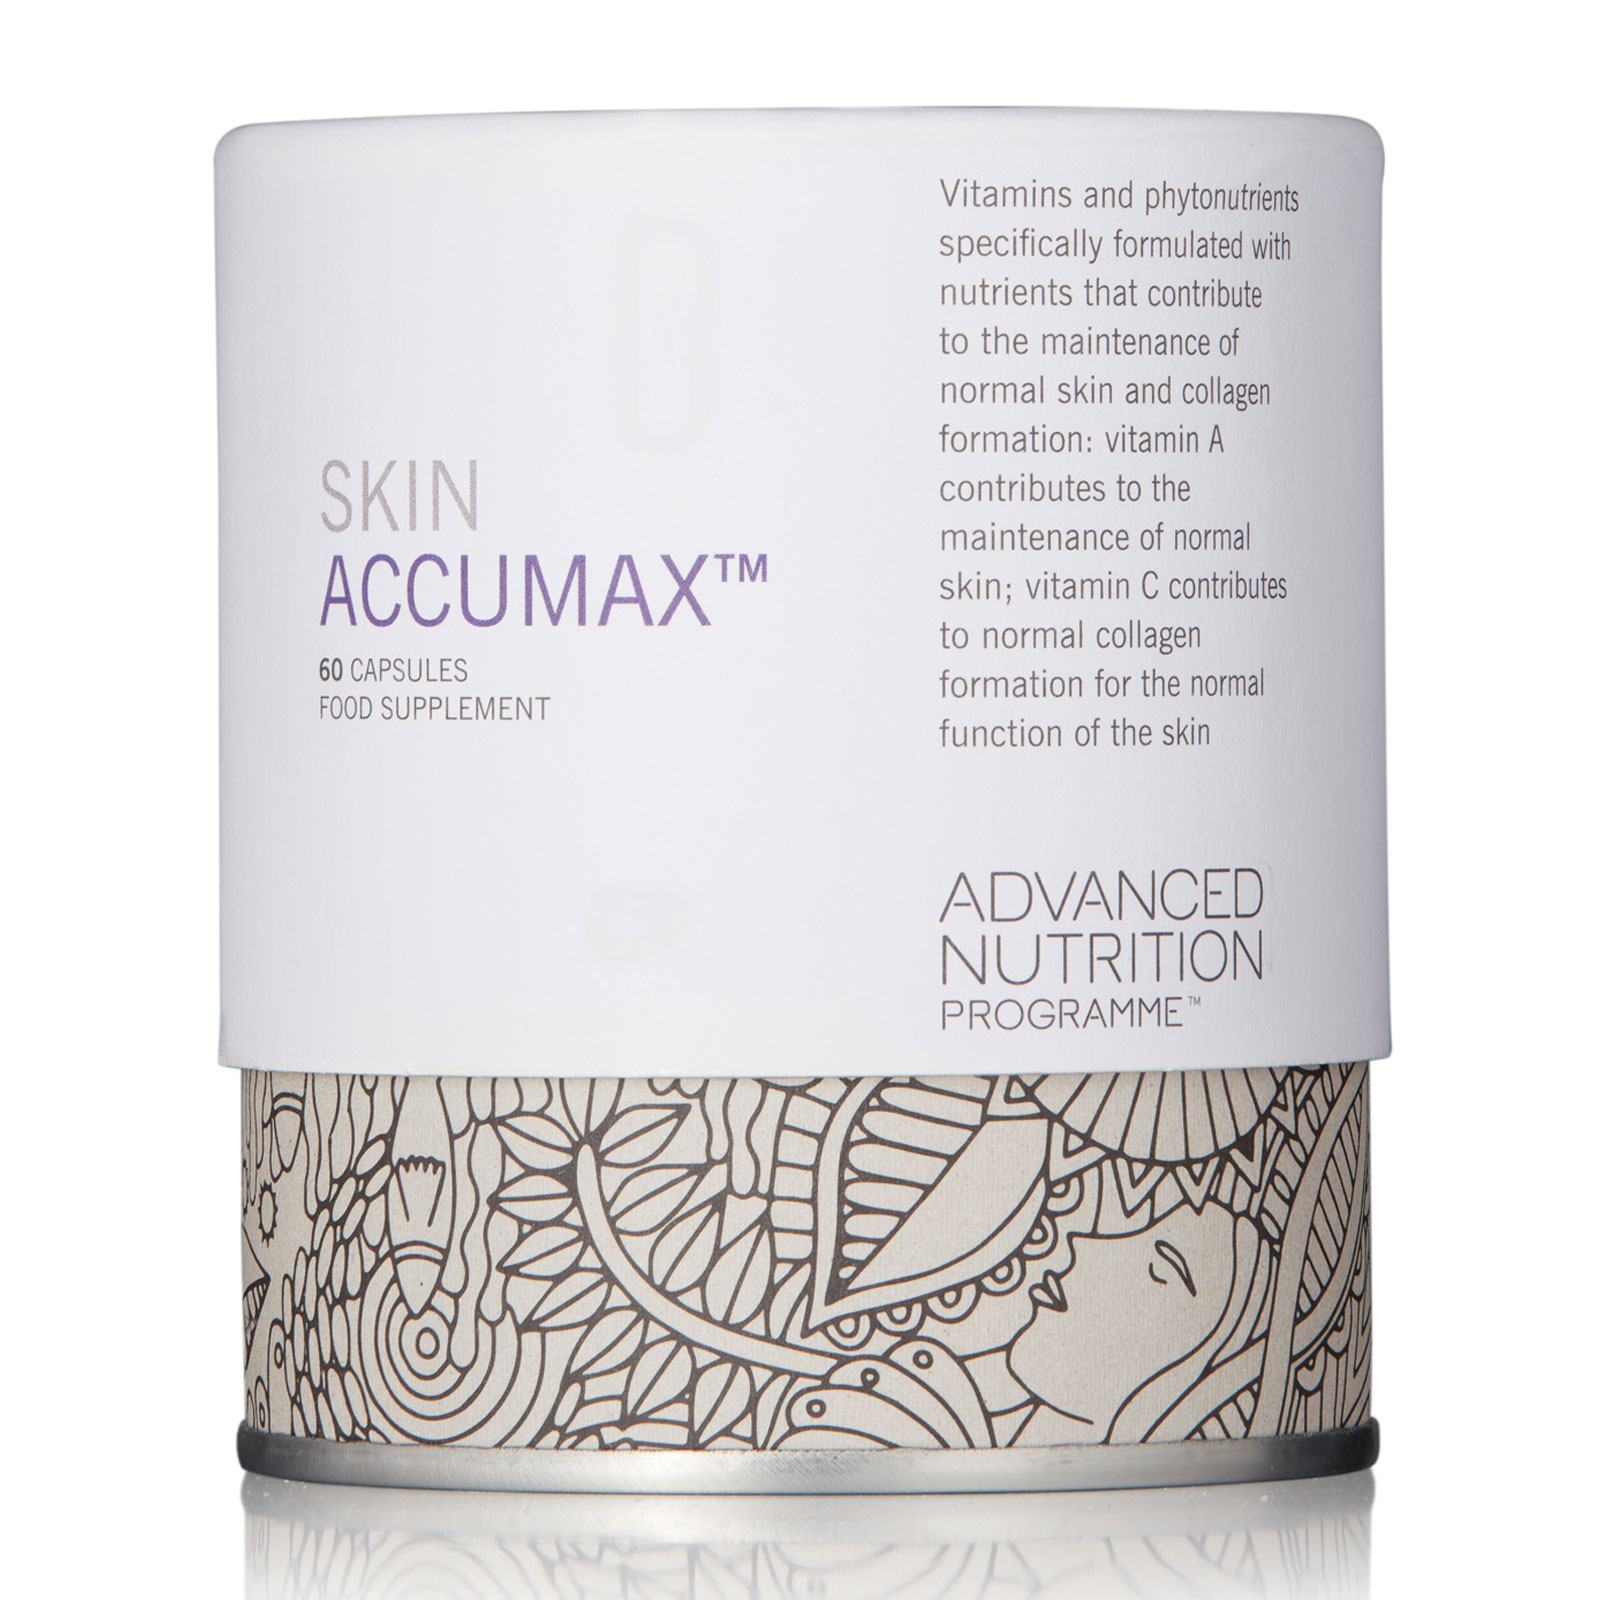 Advanced Nutrition Programme Skin Accumax Food Supplement X 60 Capsules